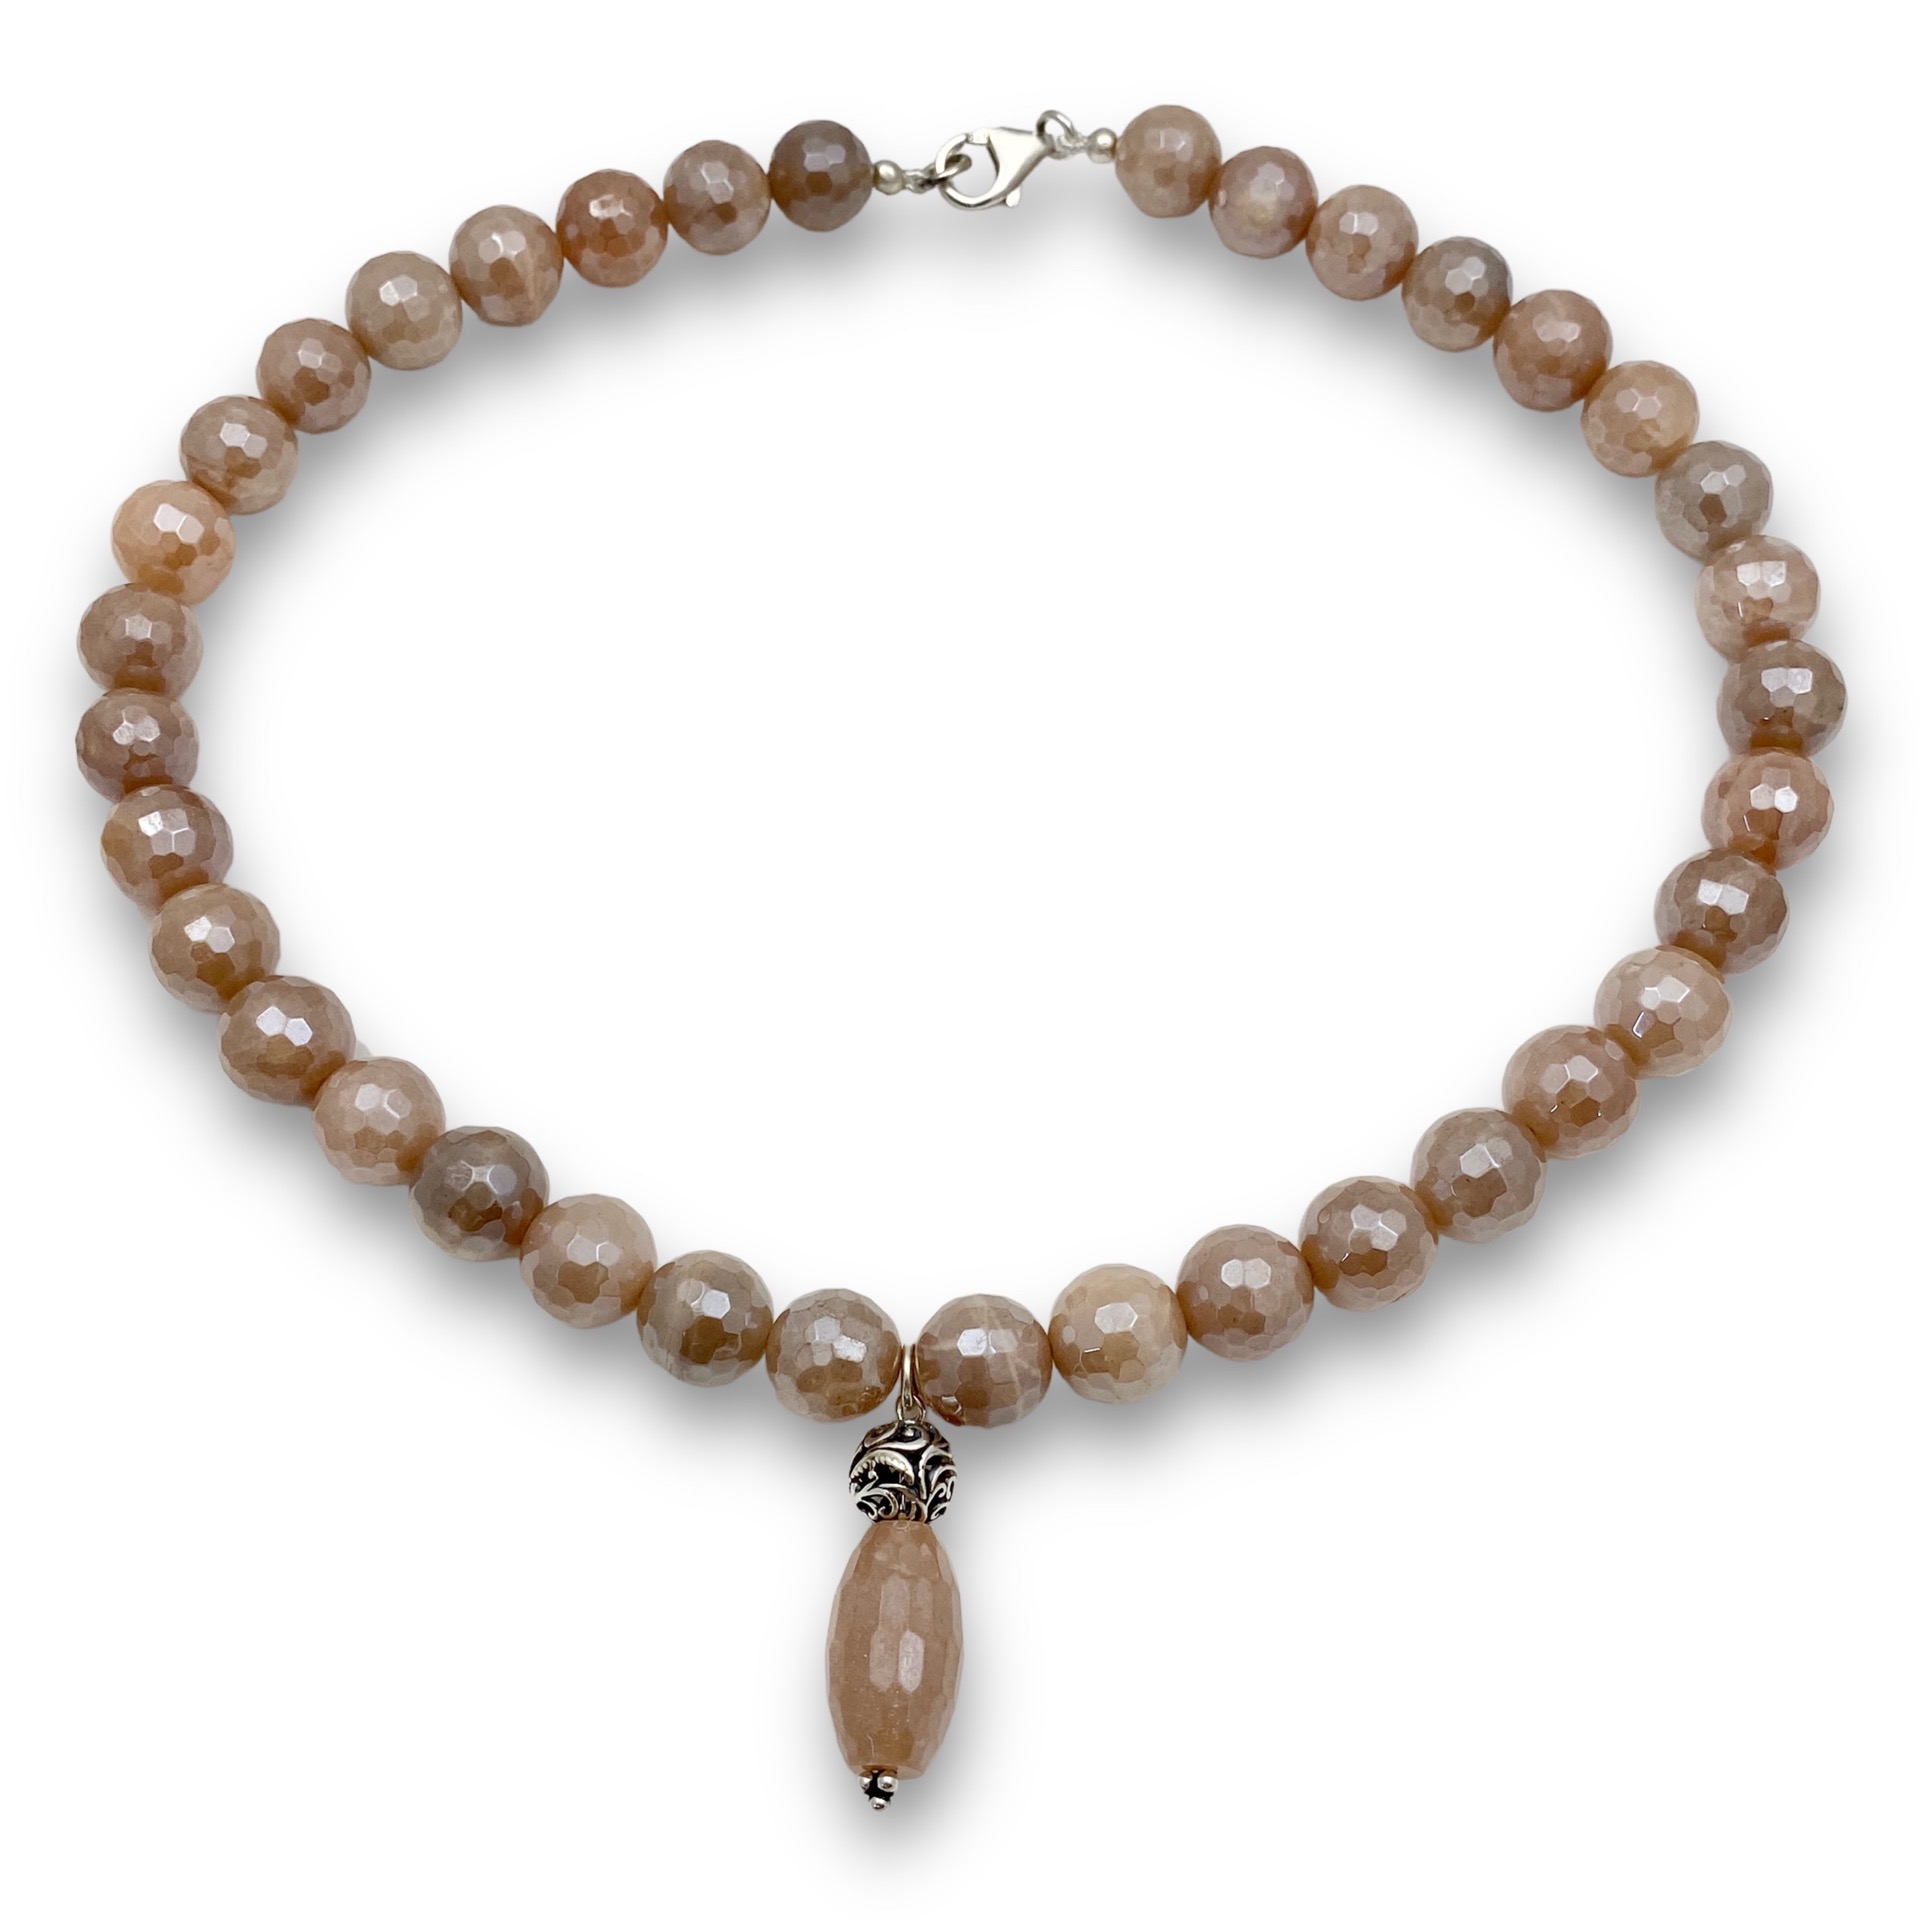 Mystic moonstone large bead necklace